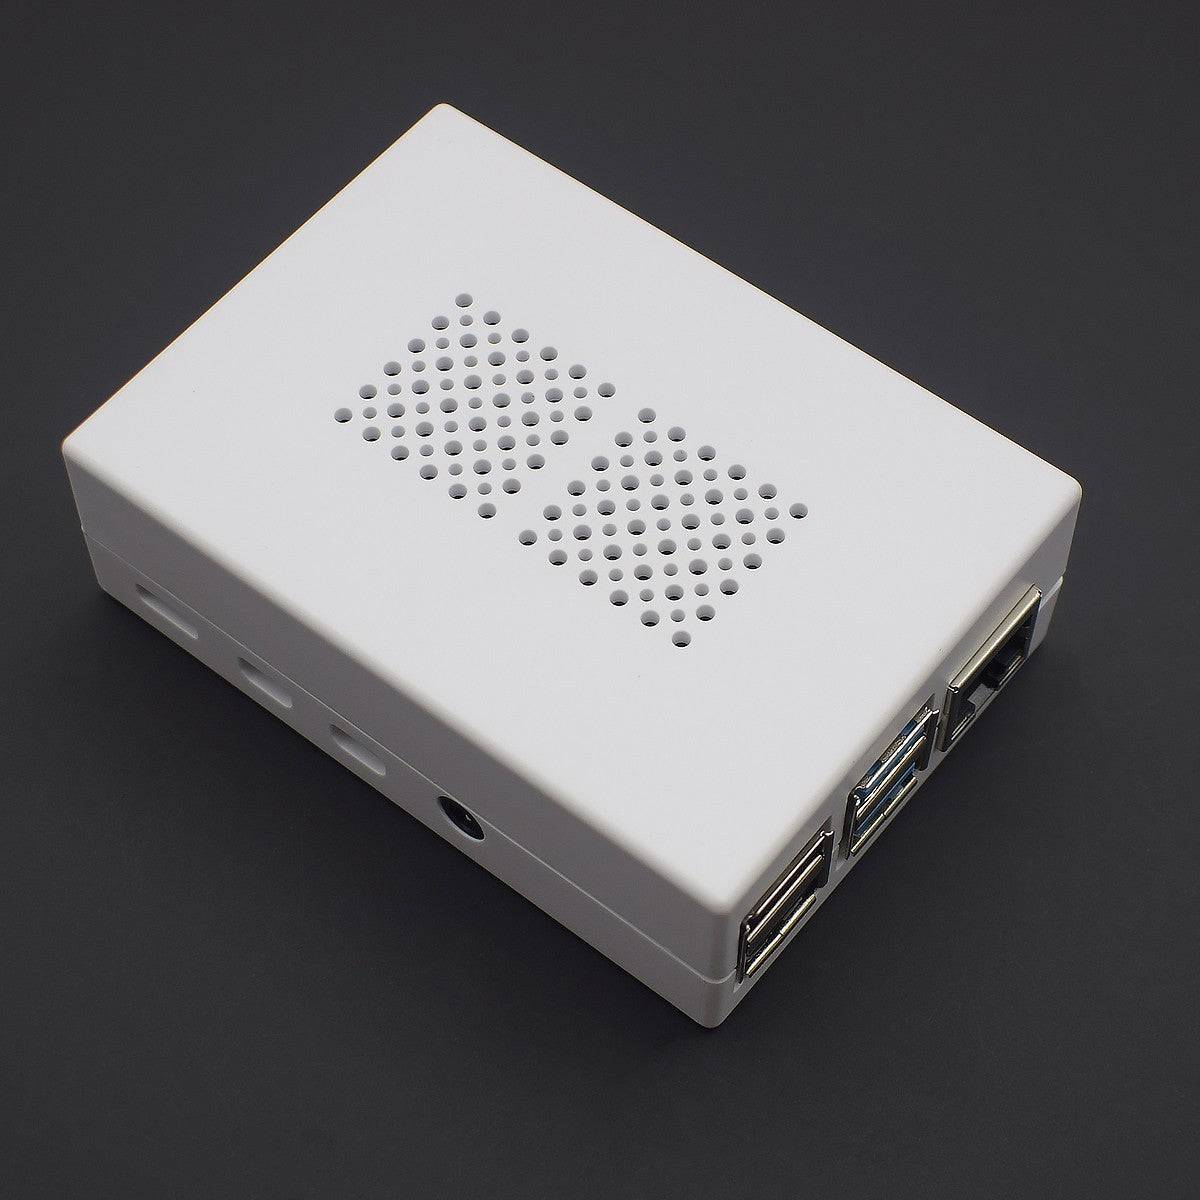 Raspberry Pi 4 ABS Case Firm Dust Resistance With Dual Fan For Pi 4 Model B (White) - RS2662 - REES52